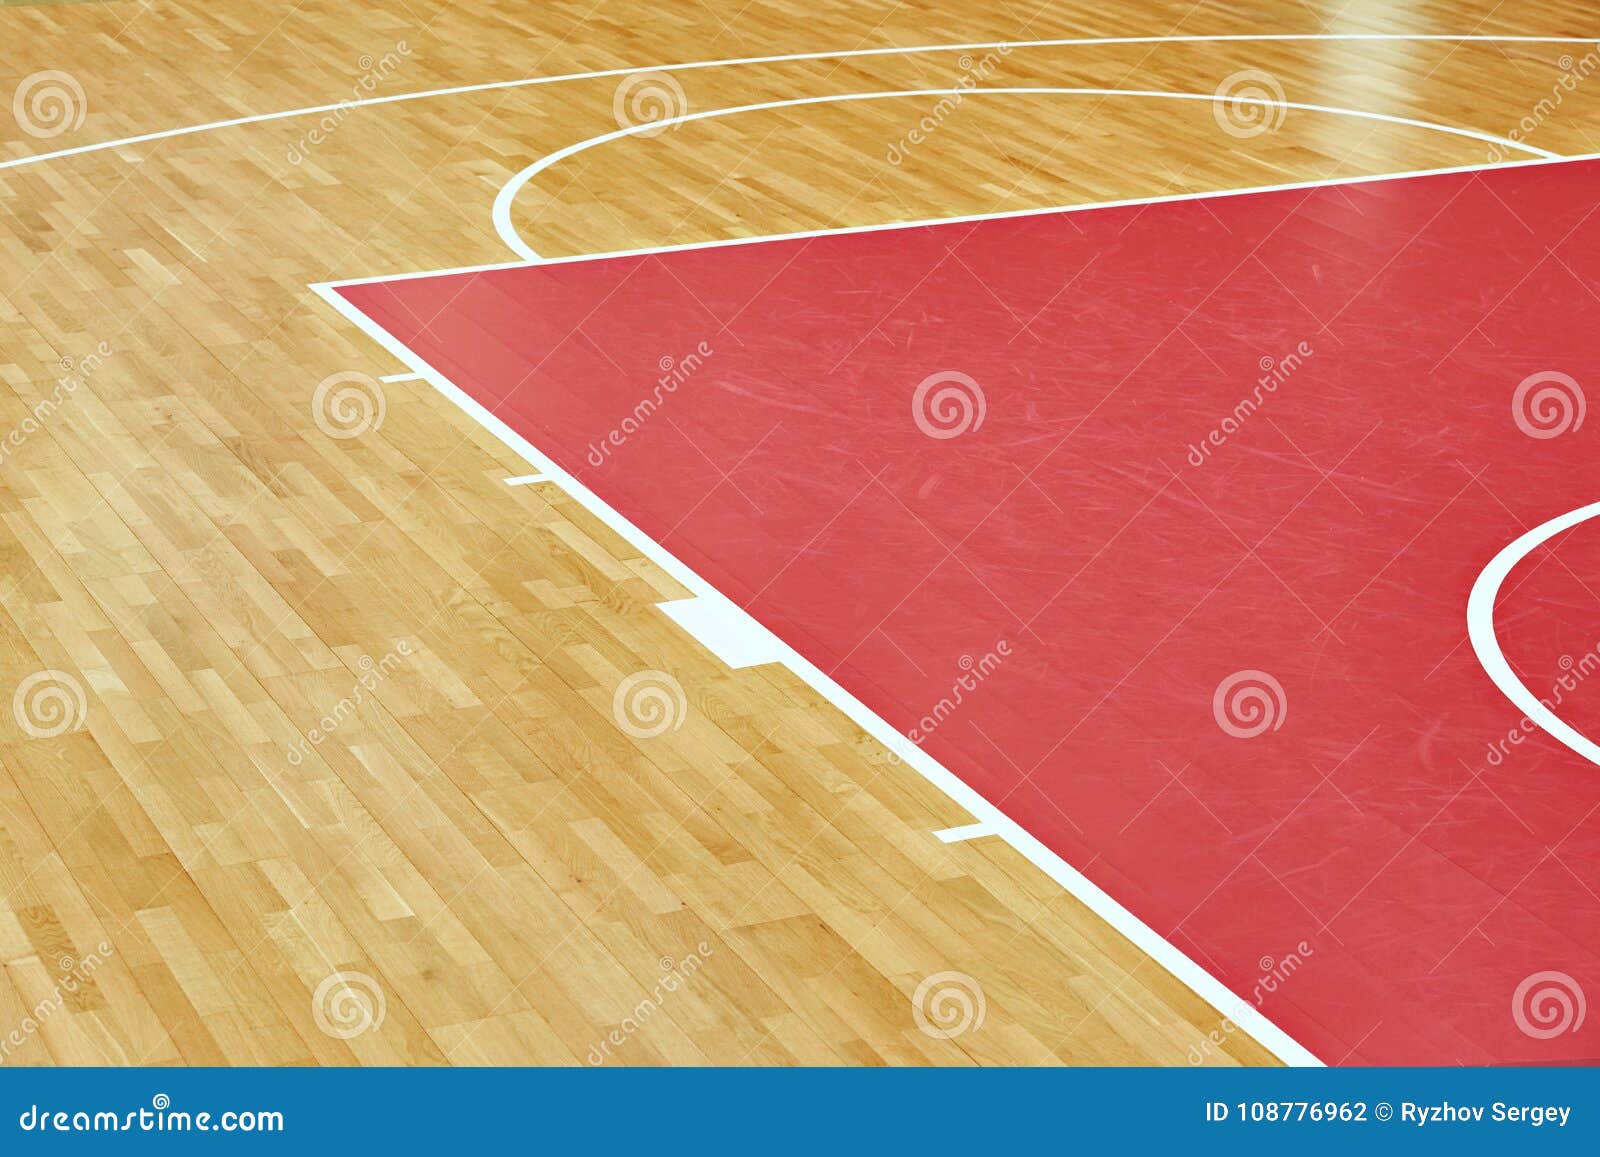 3,700+ Wood Basketball Court Stock Photos, Pictures & Royalty-Free